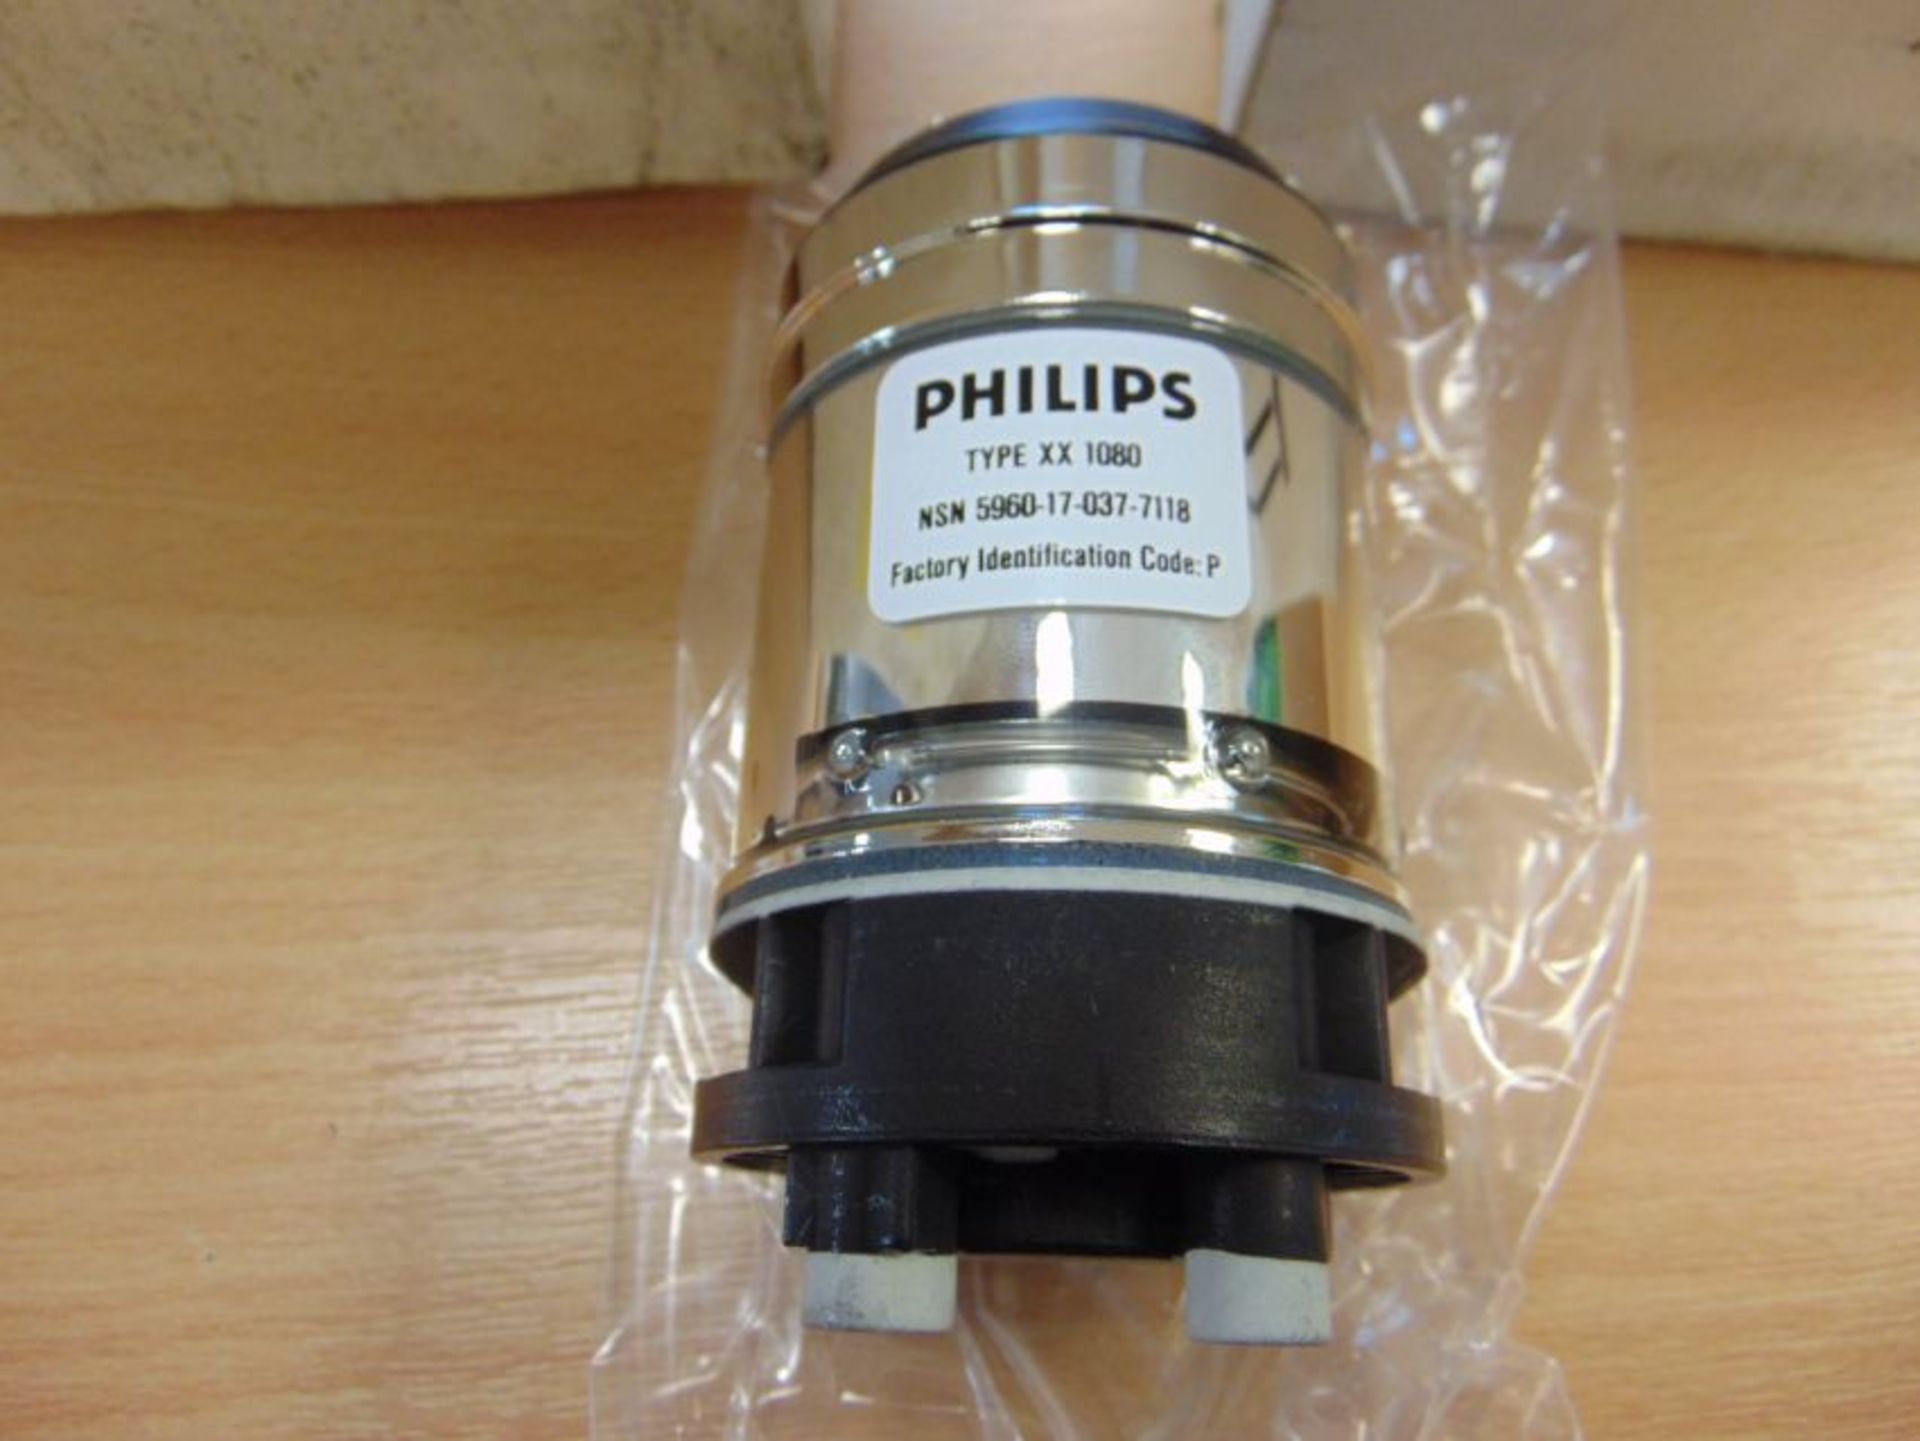 3x New Unissued Philips Optical Image Intensifiers model No XX1080 in Original Packing - Image 4 of 4